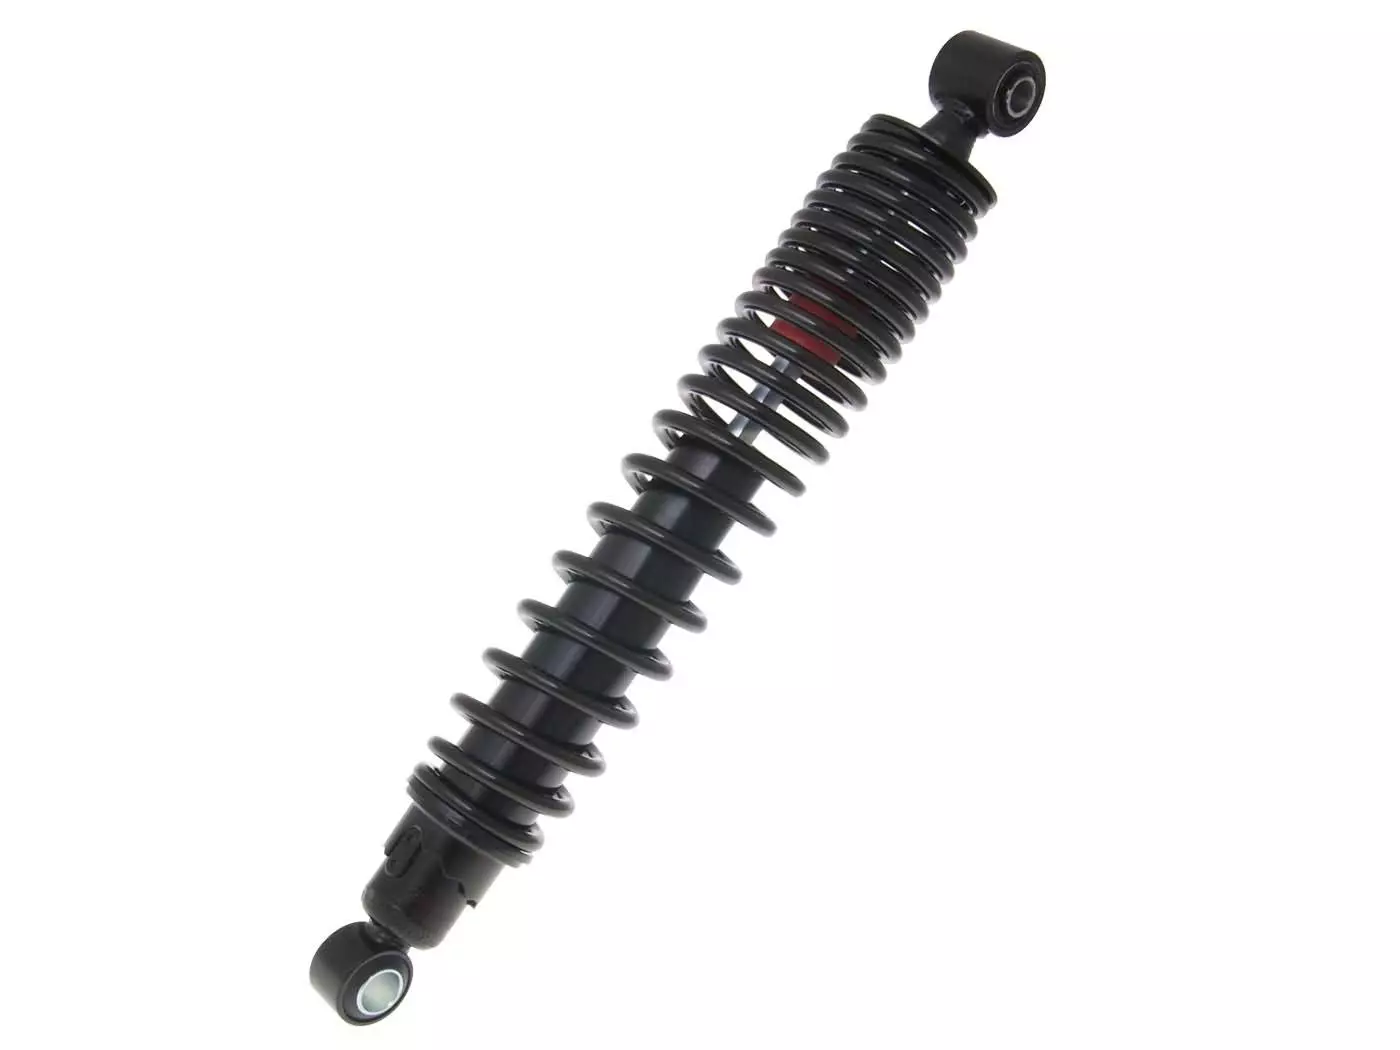 Shock Absorber Forsa For Piaggio Beverly RST 125, 300 4T 4V 2010